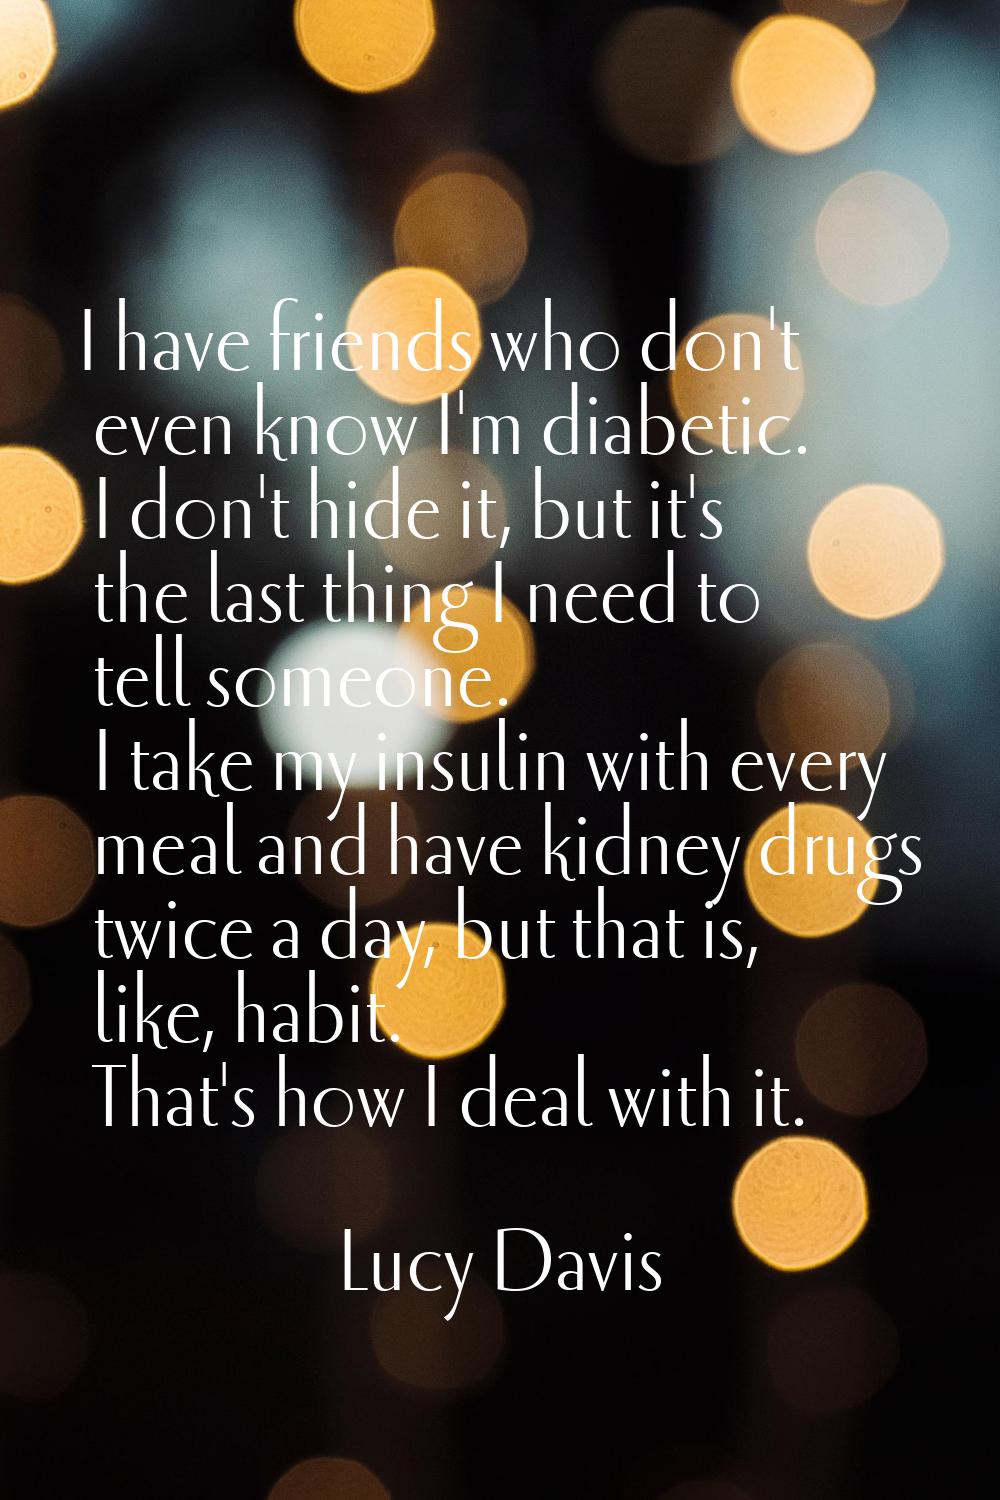 I have friends who don't even know I'm diabetic. I don't hide it, but it's the last thing I need to